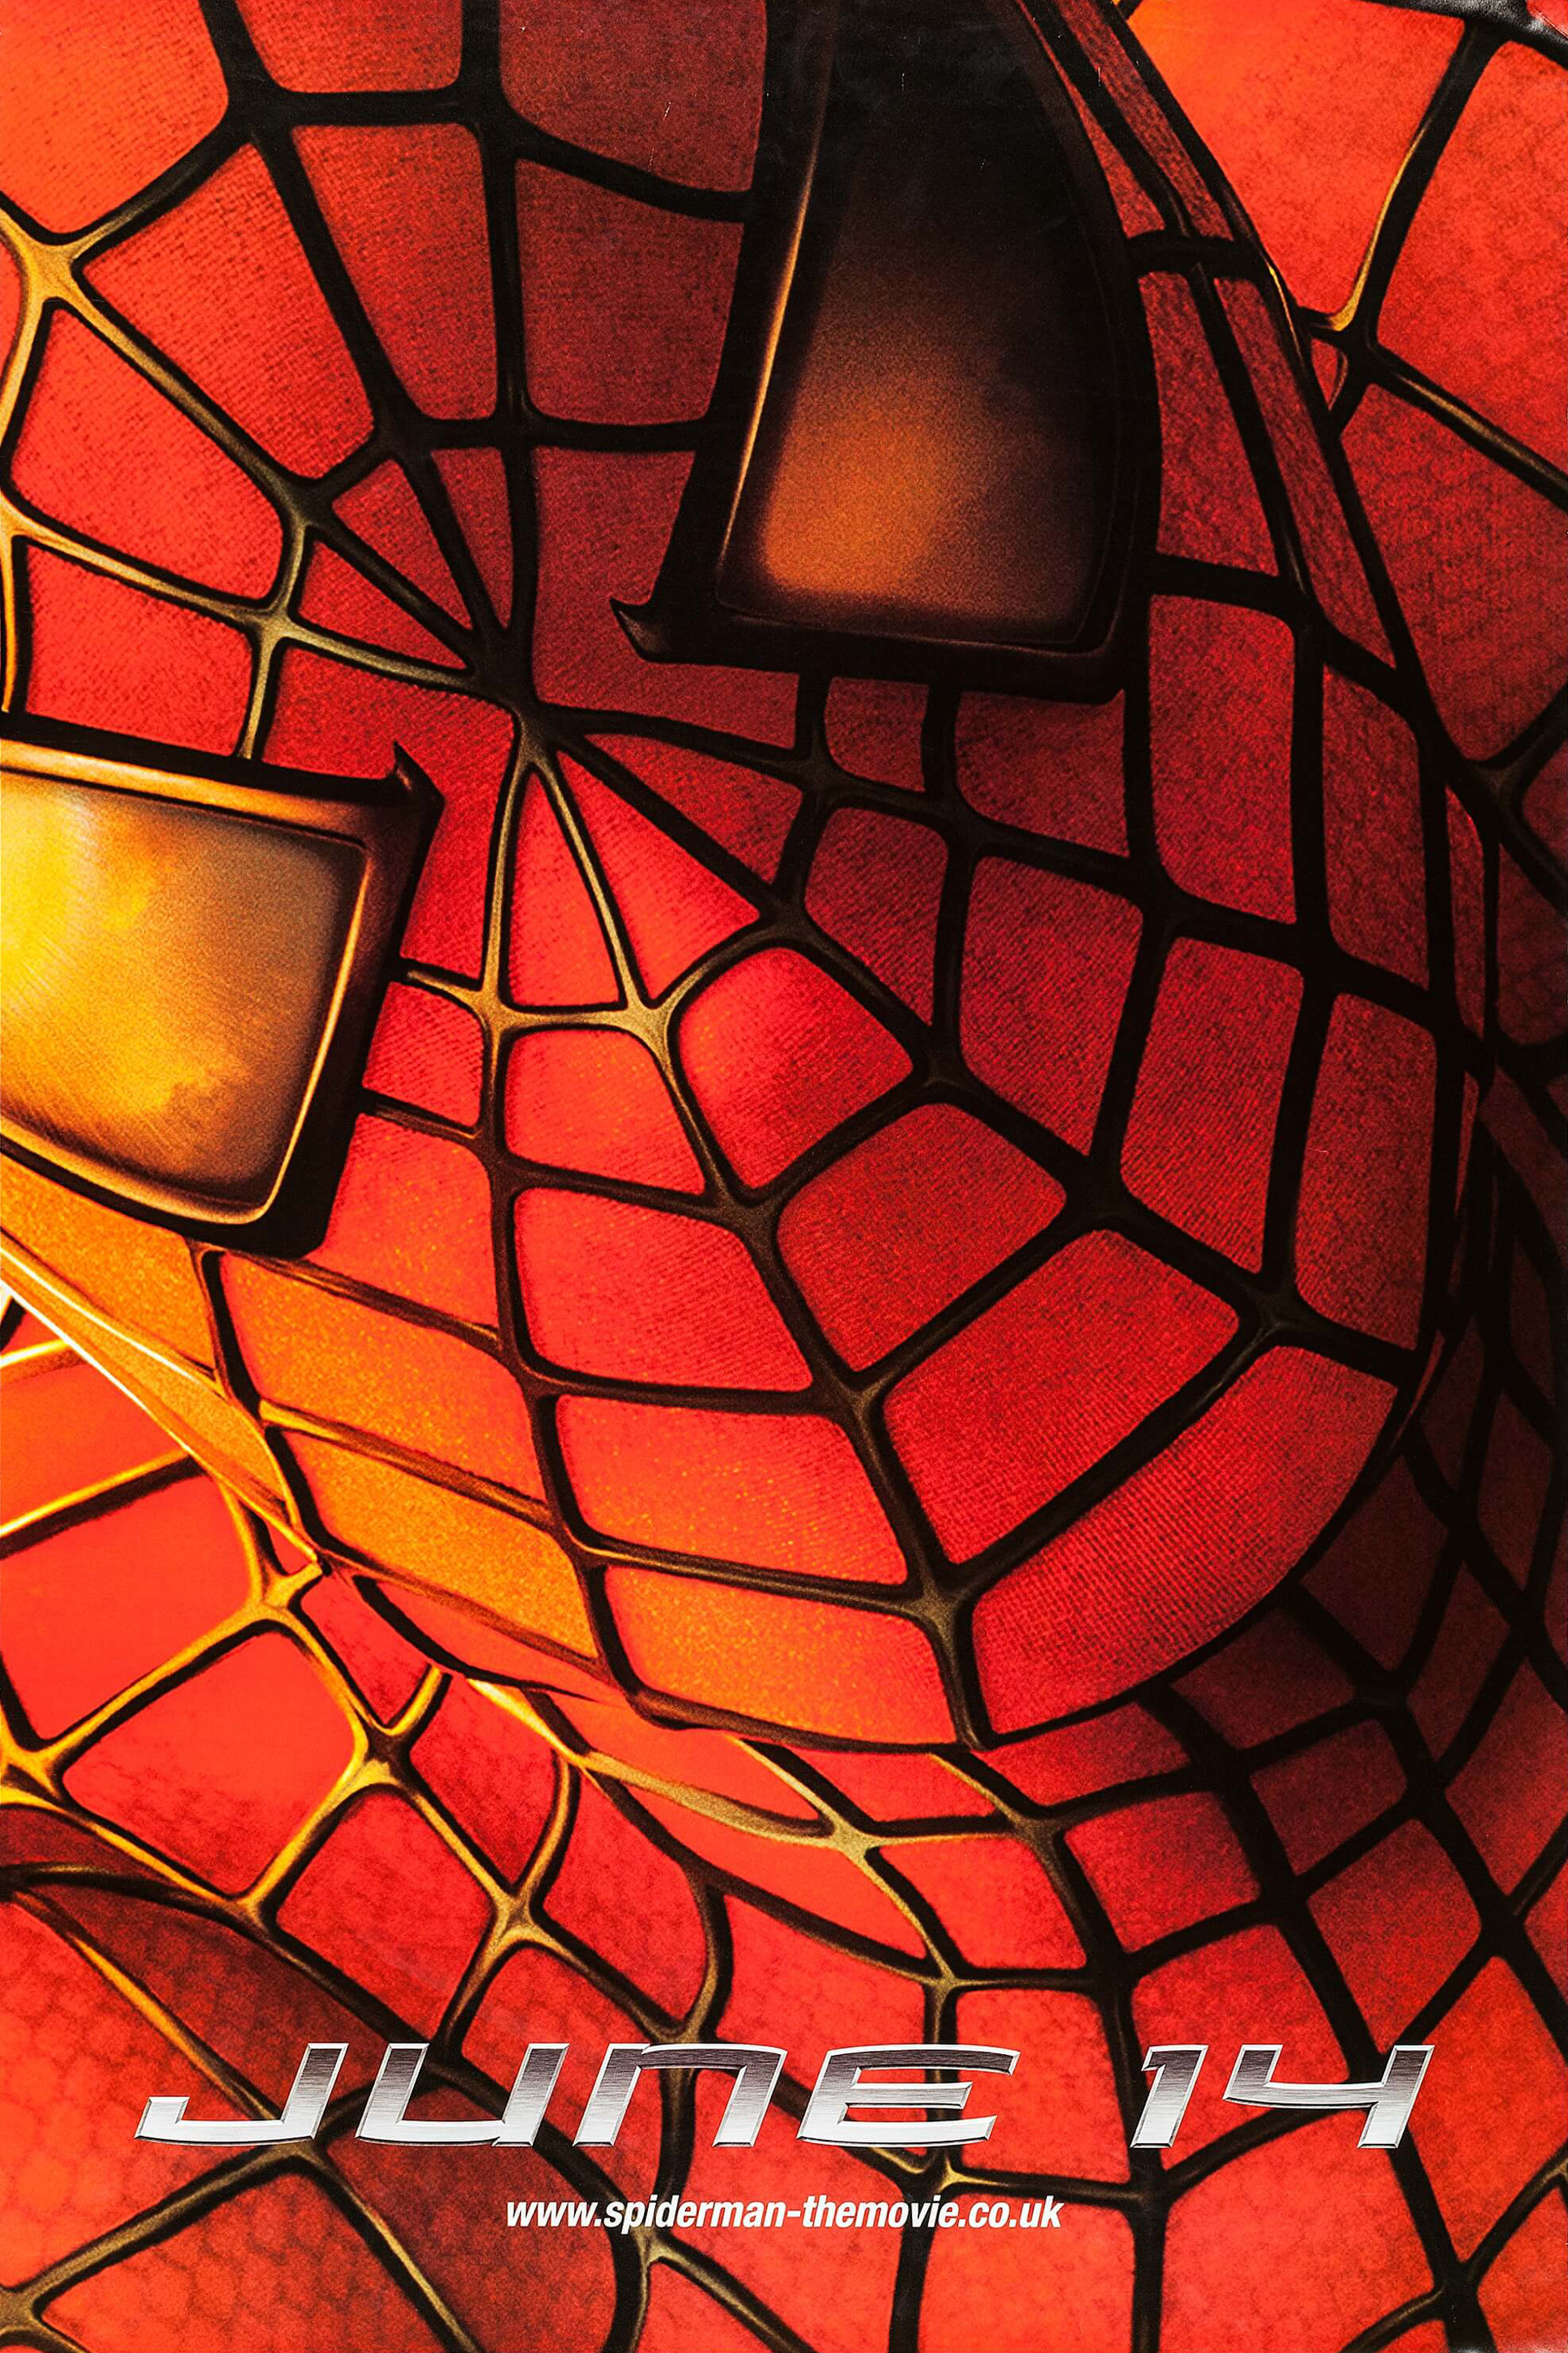 Mega Sized Movie Poster Image for Spider-man (#4 of 5)